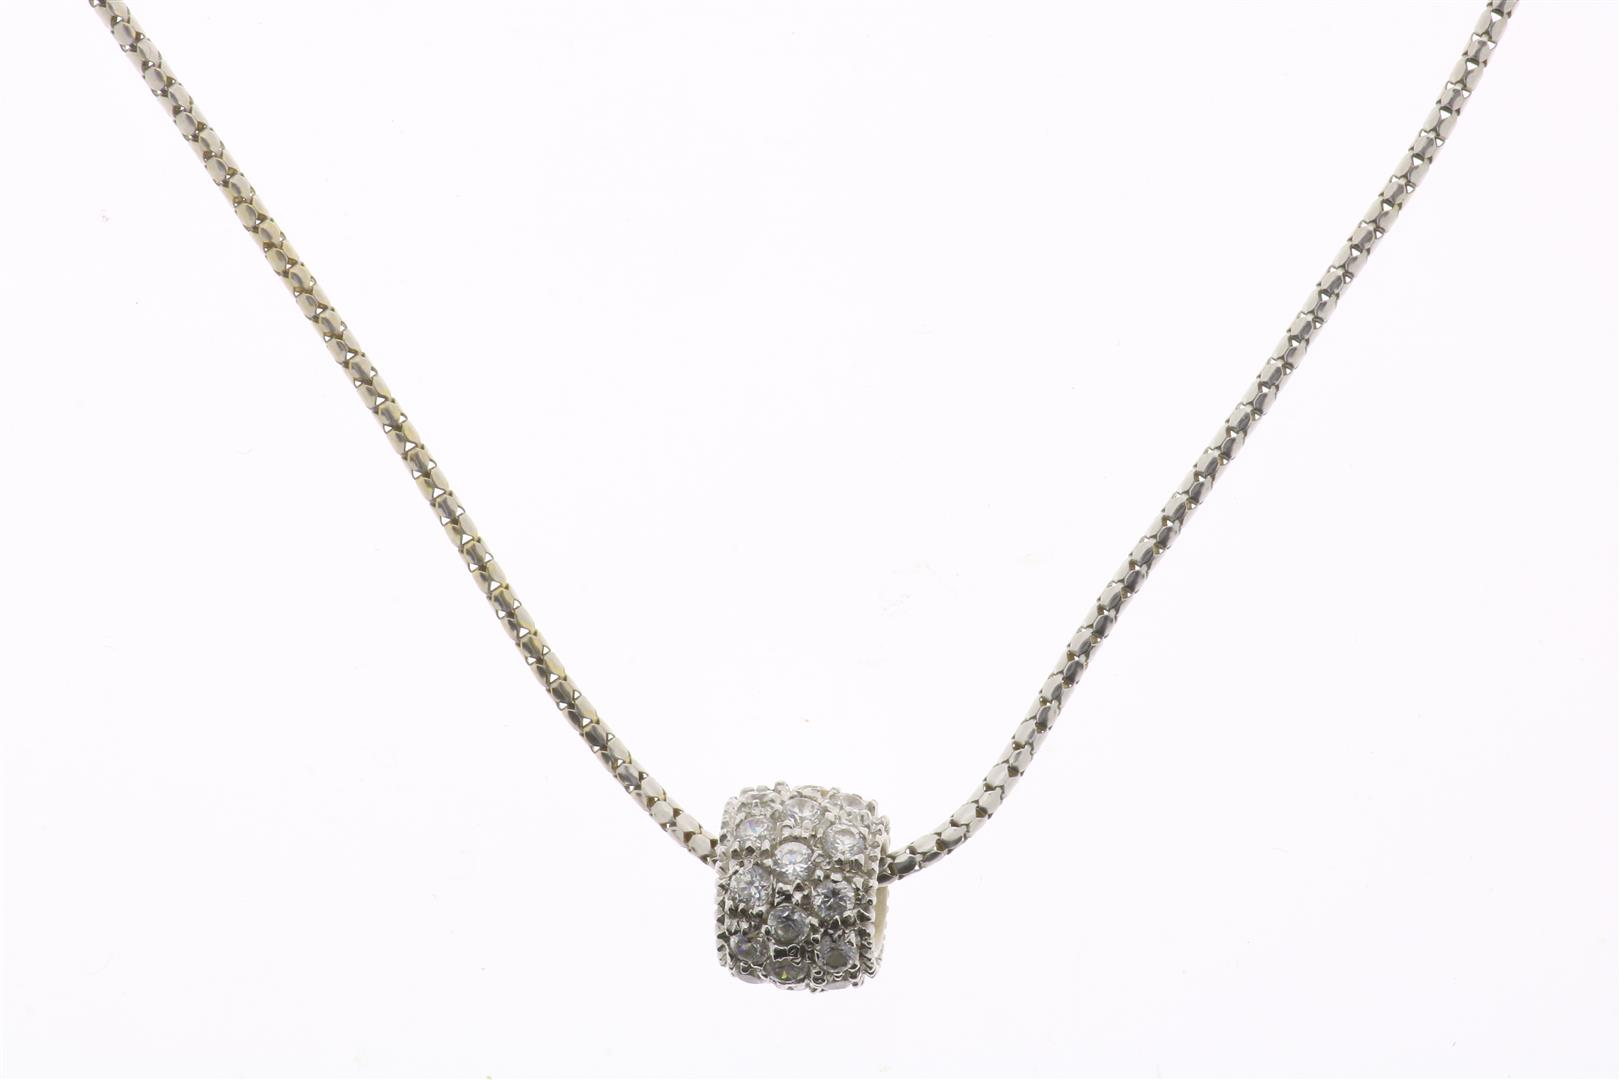 White gold necklace with bead. At the discretion of a jewelry expert.